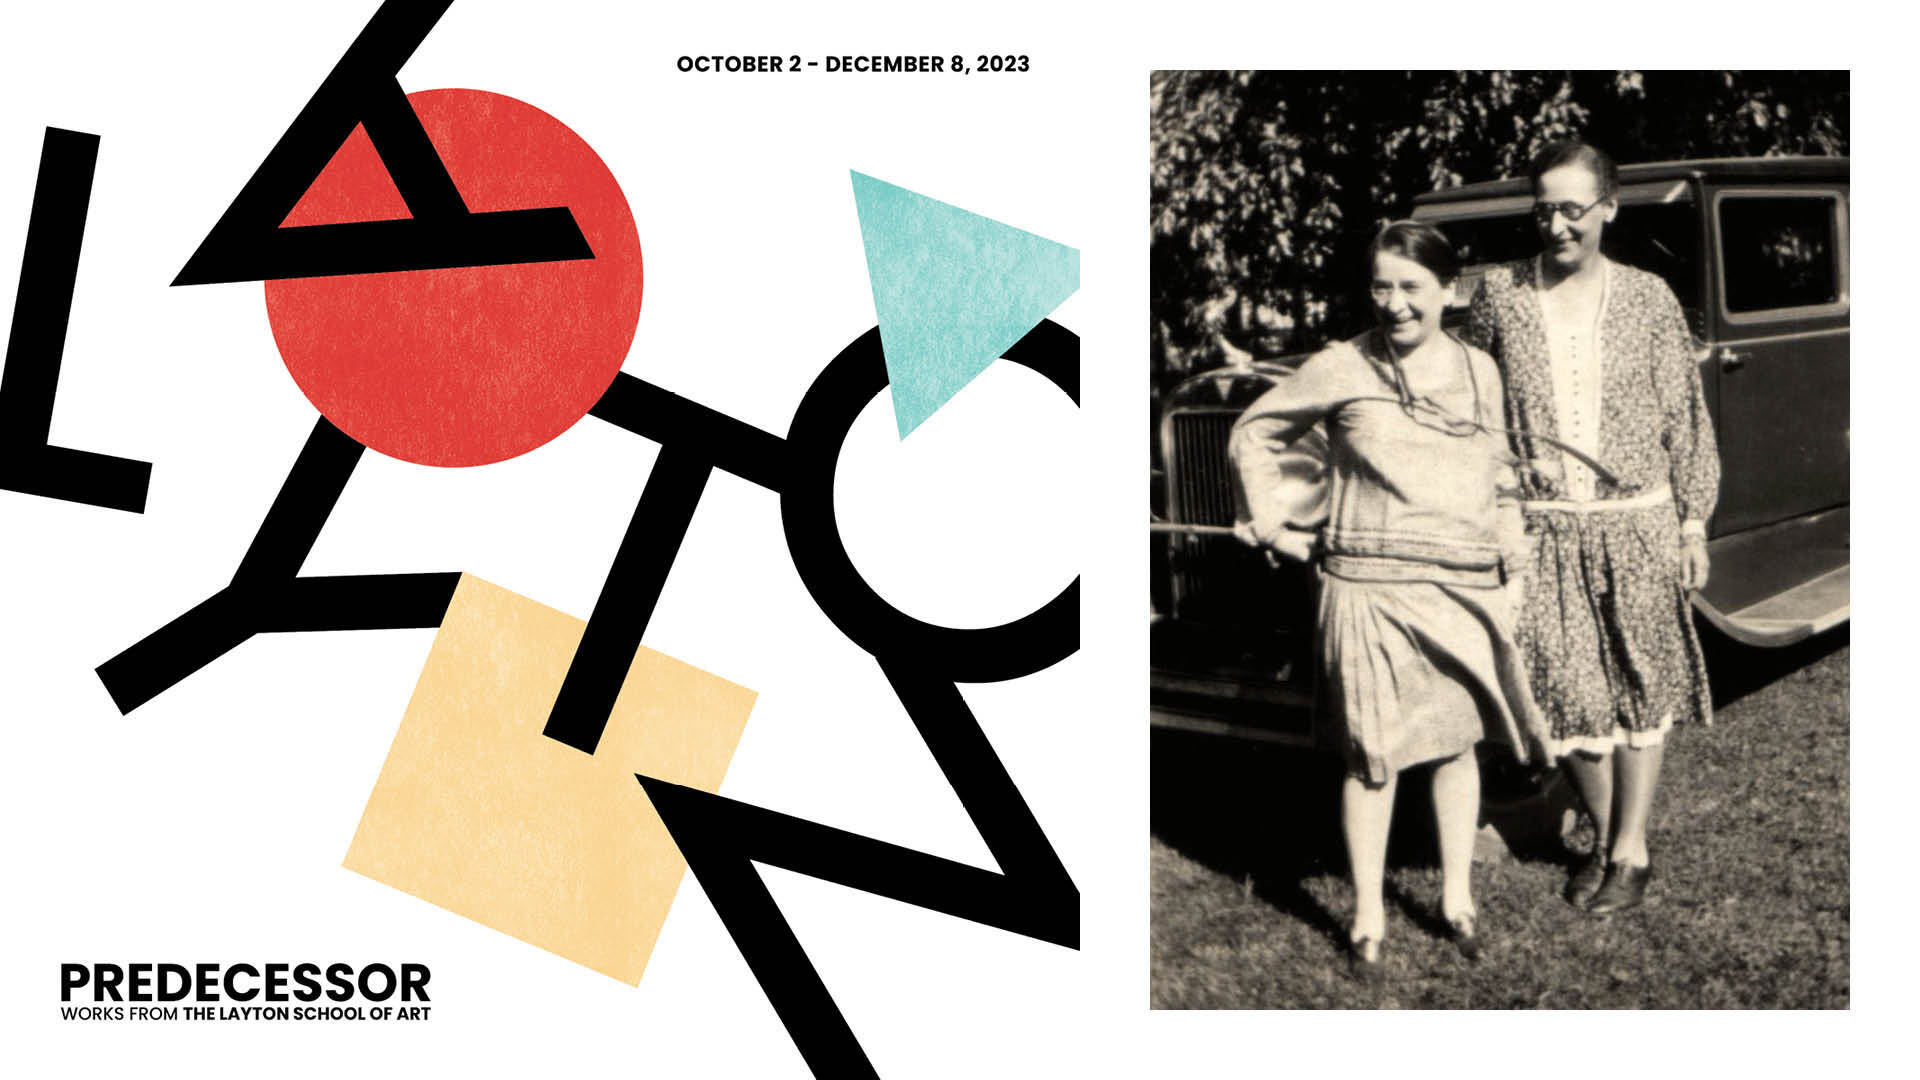 Abstract graphic poster featuring bold geometric shapes in red, teal, and beige on the left, and a vintage black and white photograph of two individuals standing next to an old car on the right. Text reads 'October 2 - December 8, 2023, PREDECESSOR, Works from the Layton School of Art'.